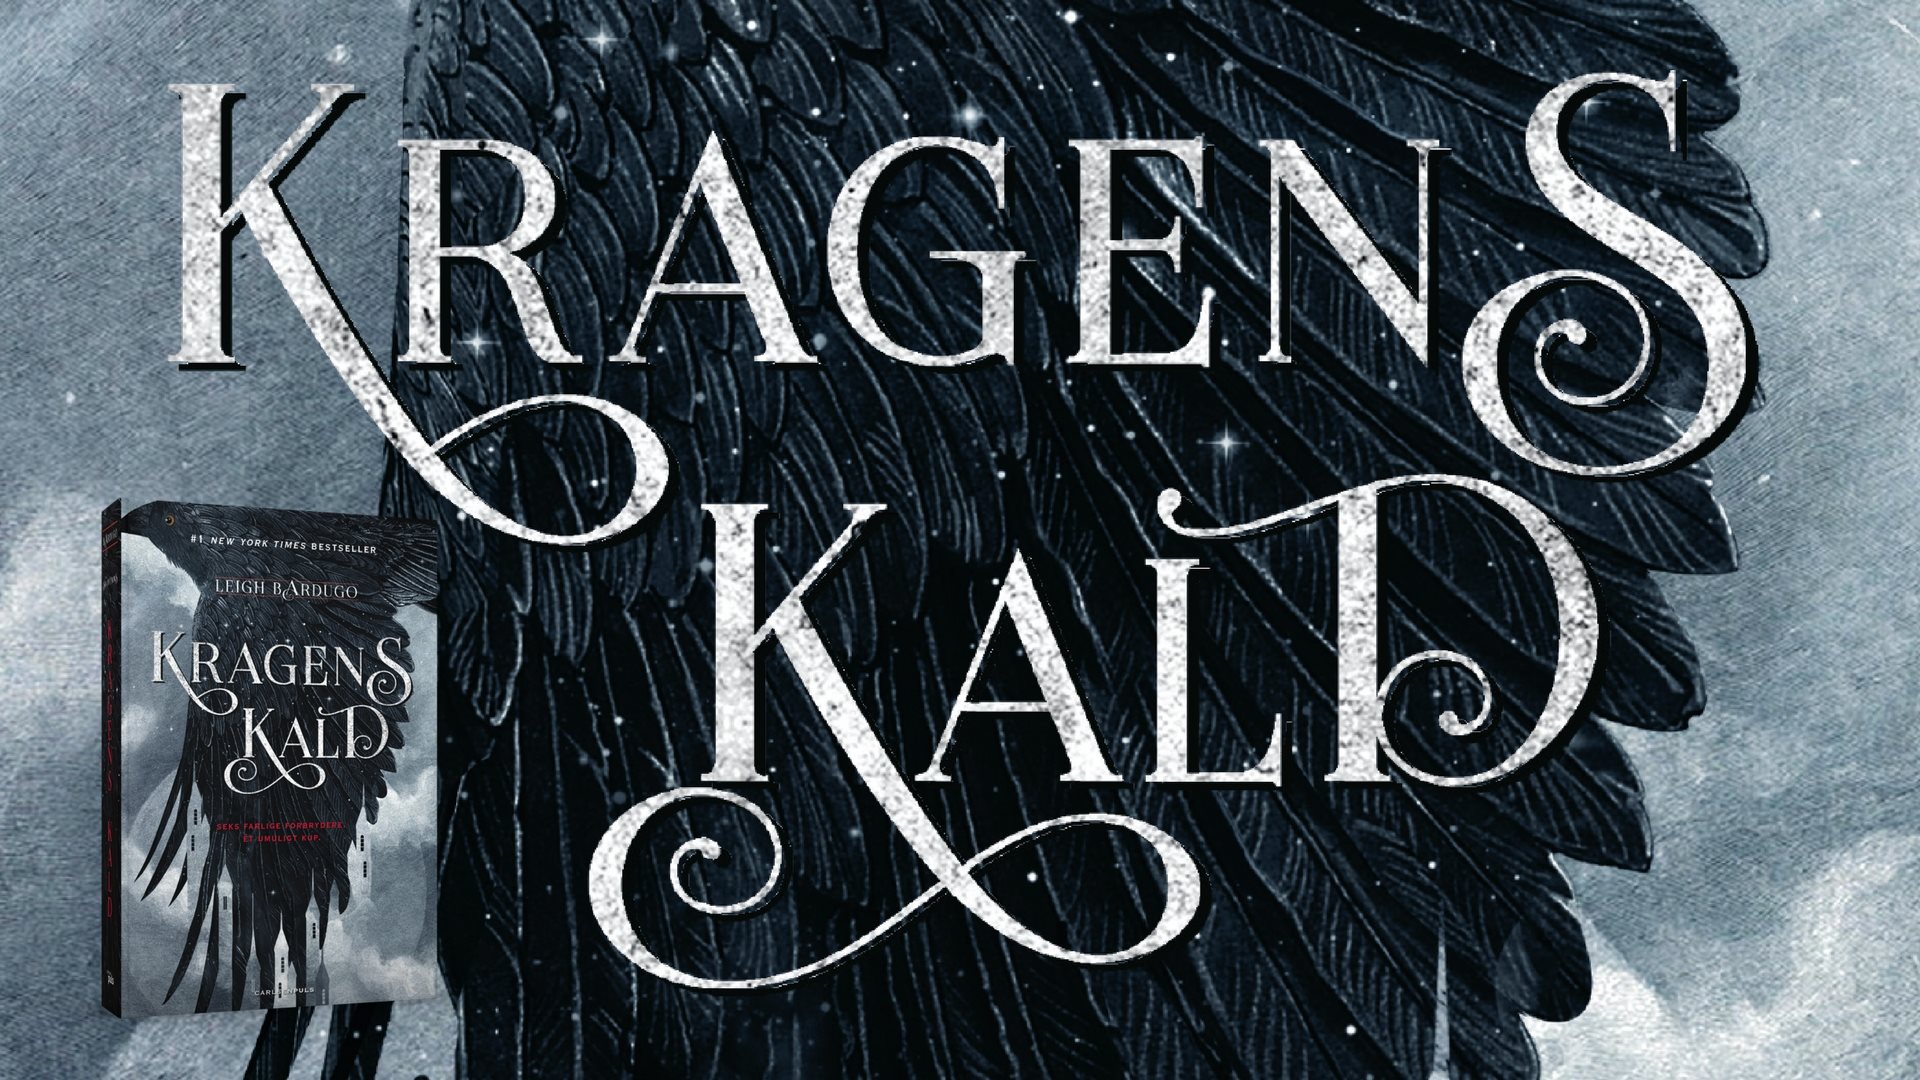 kragens kald, six of crows, leigh bardugo, ungdomsbøger, young adult